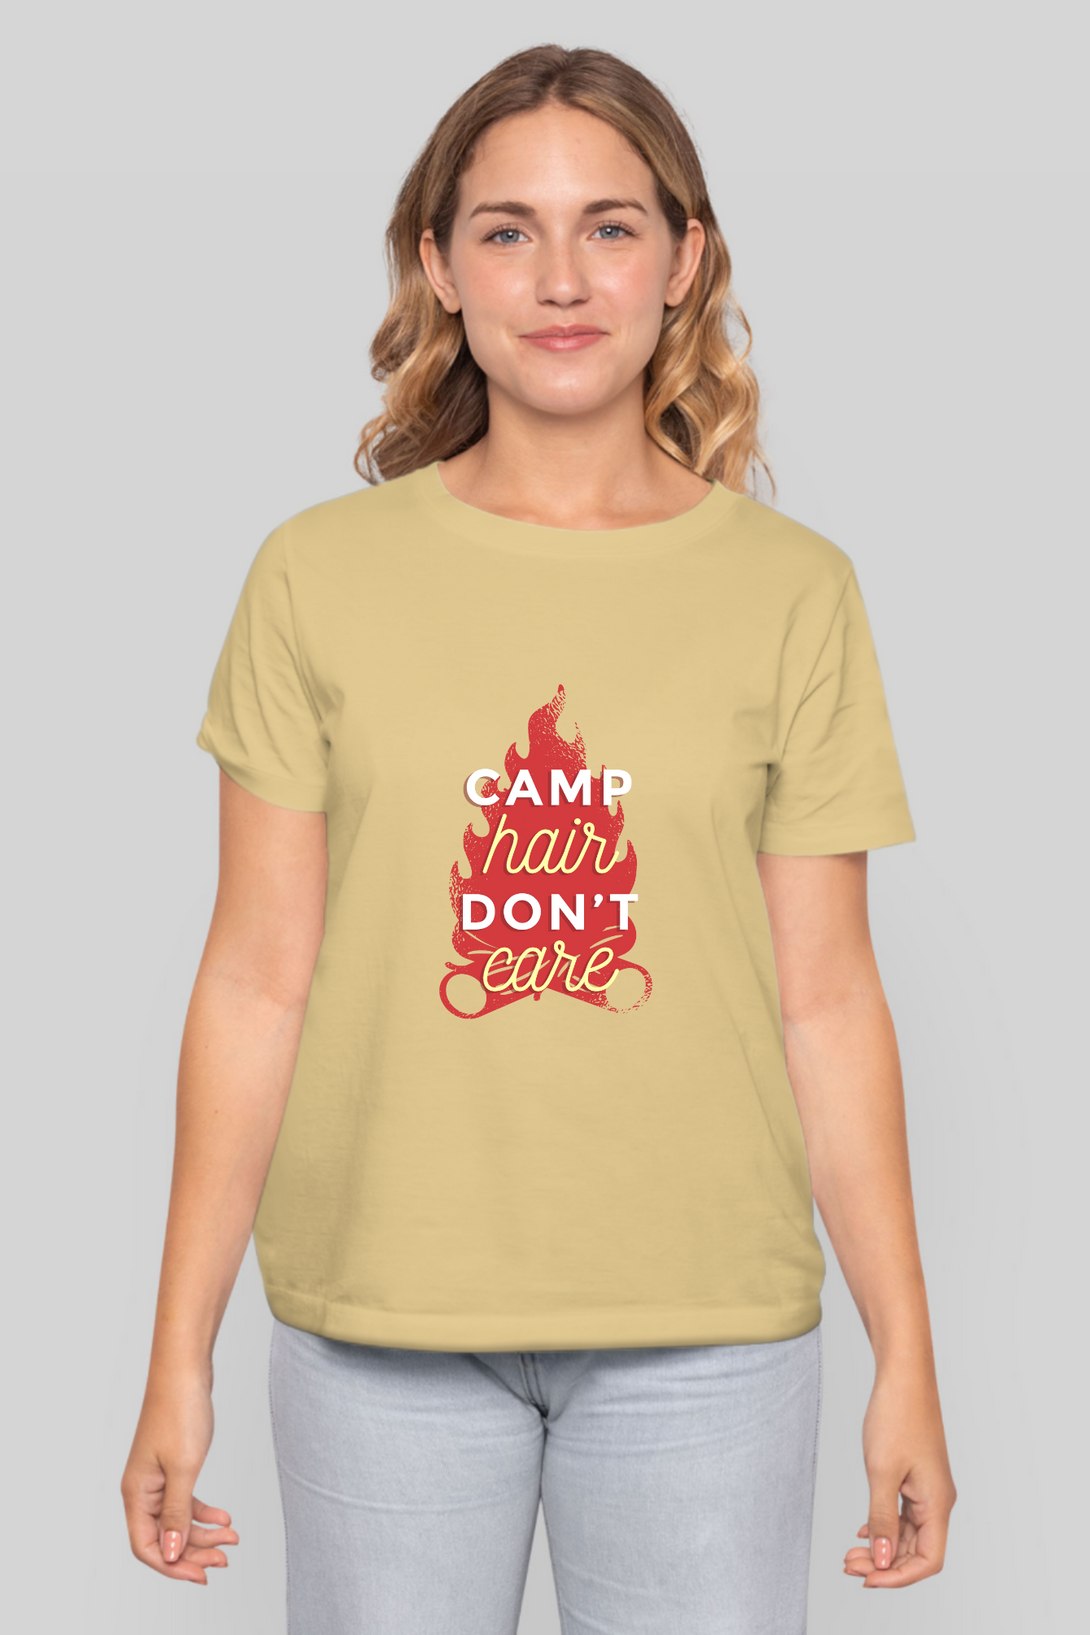 Camping Vibes Printed T-Shirt For Women - WowWaves - 15